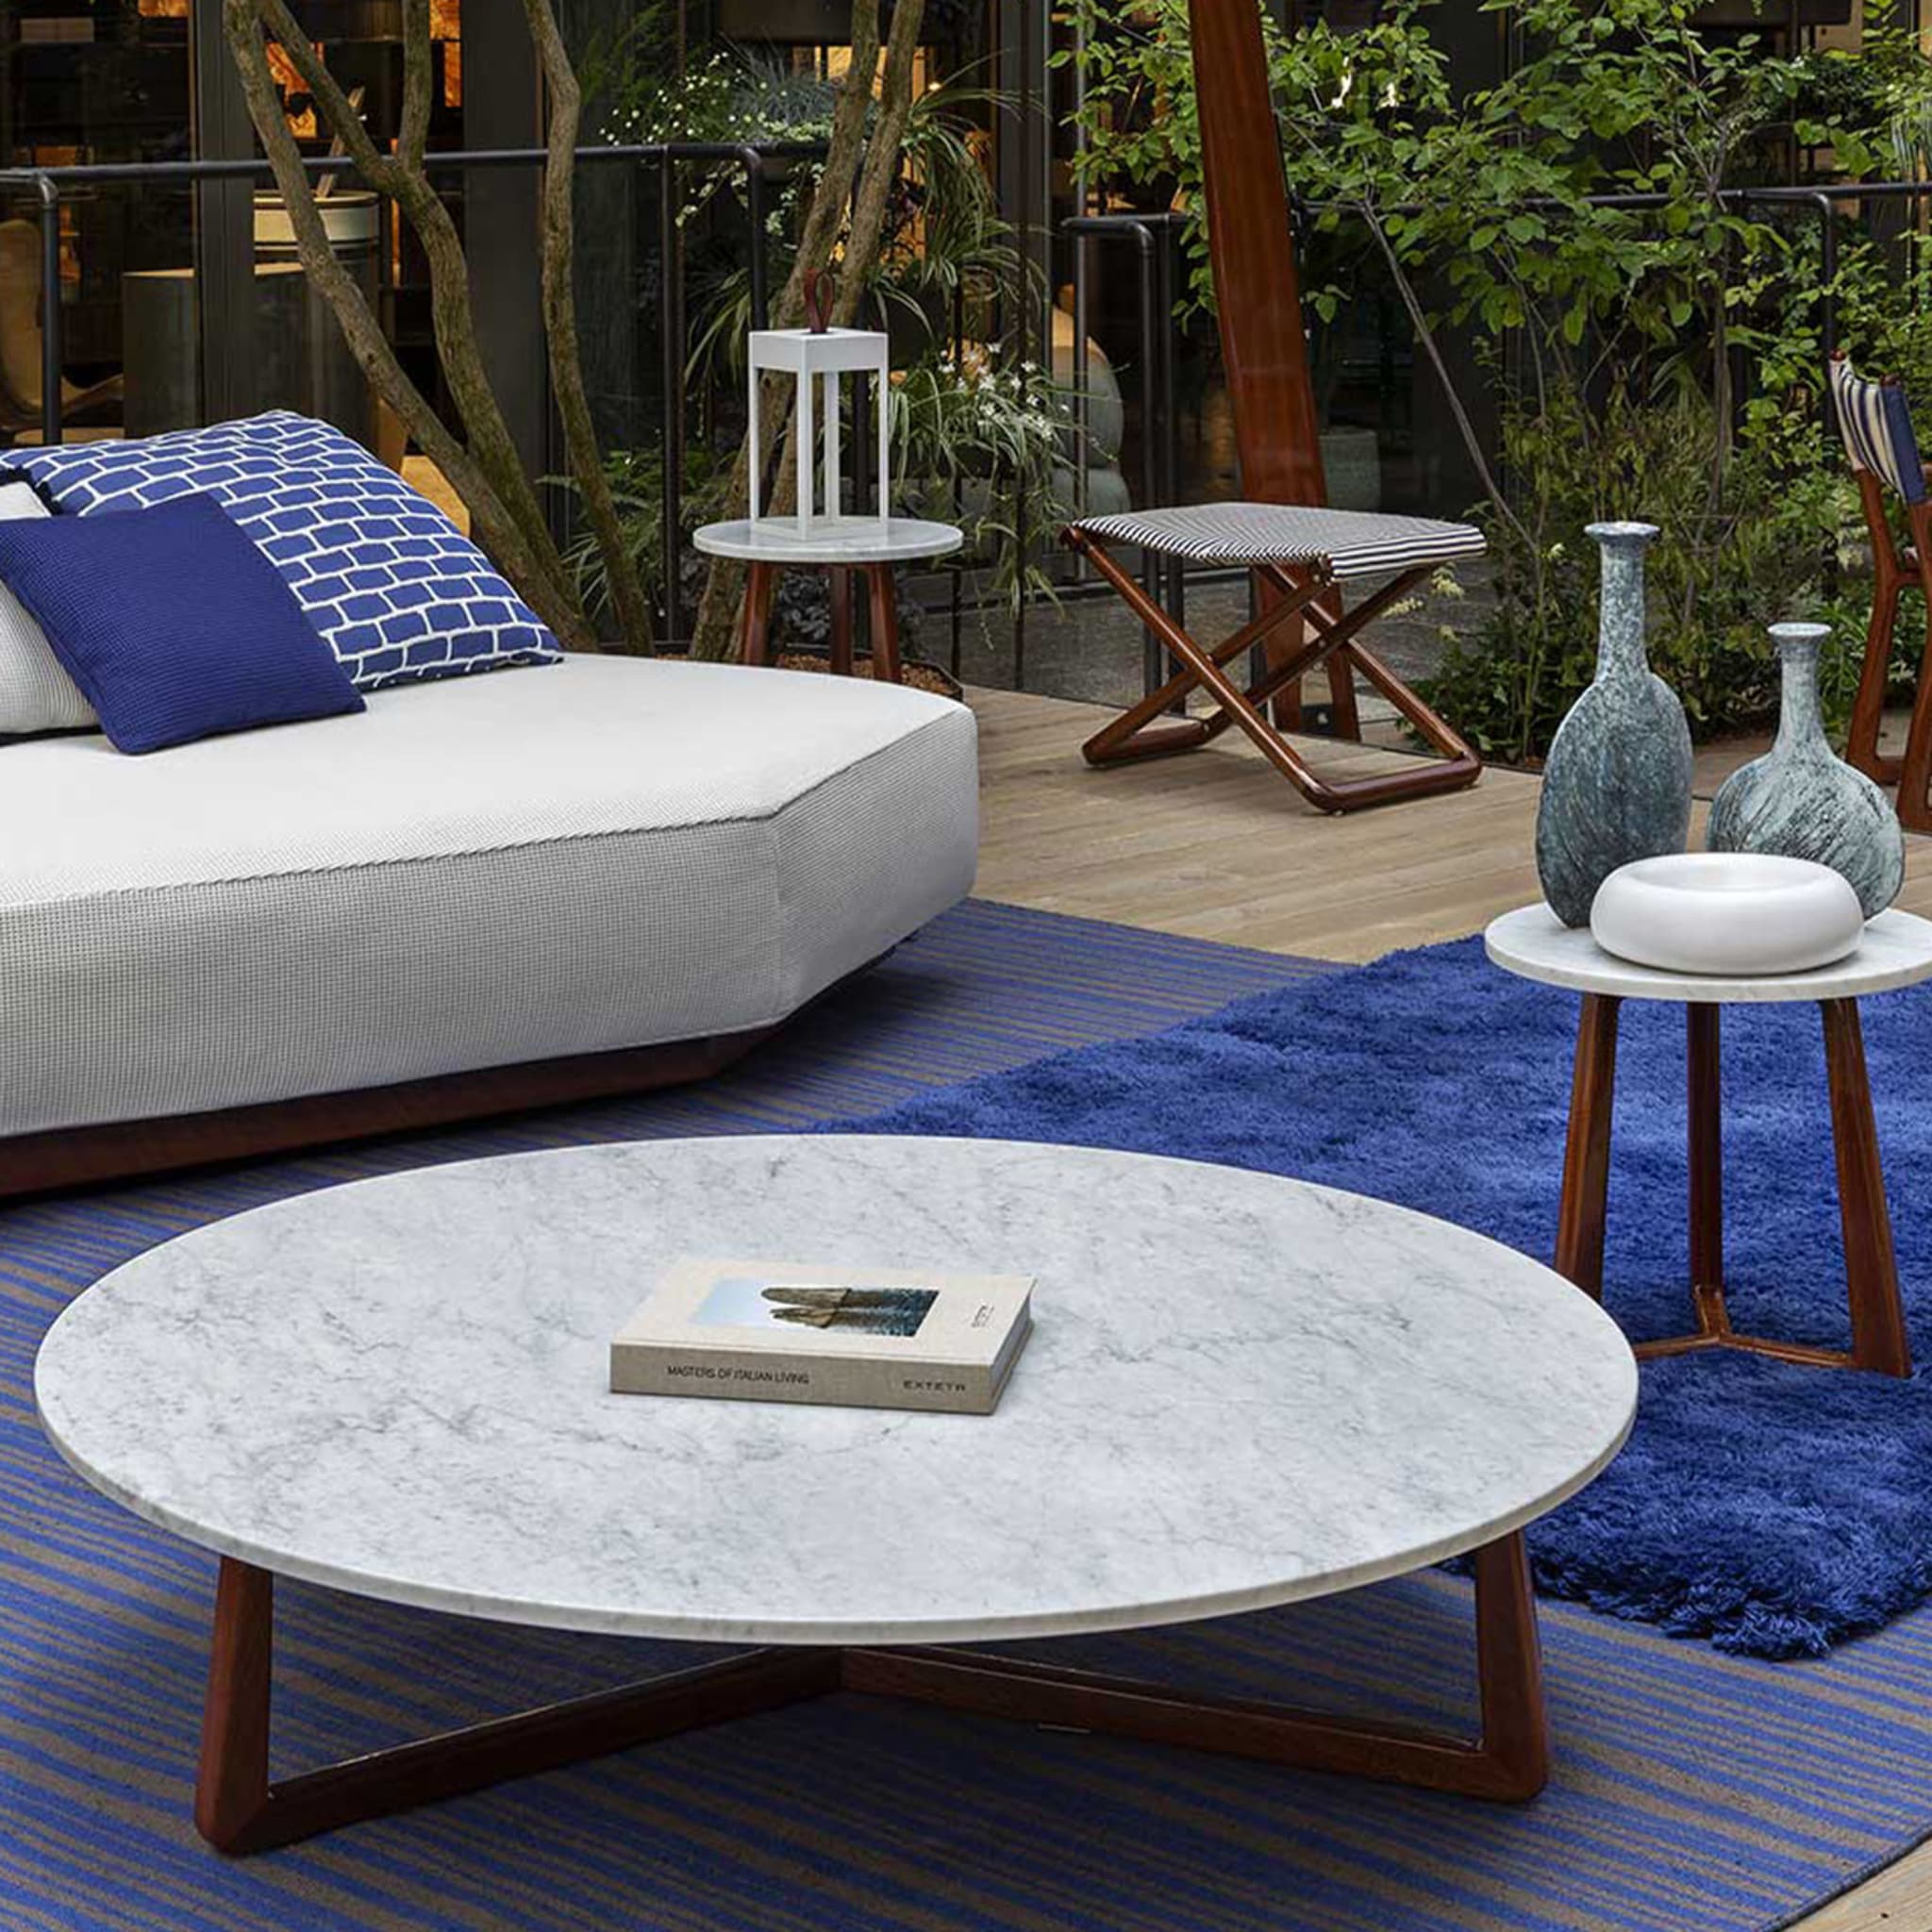 Sunset Round Lucido Mediterraneo + Carrara Coffee Table by Paola Navone - Alternative view 1